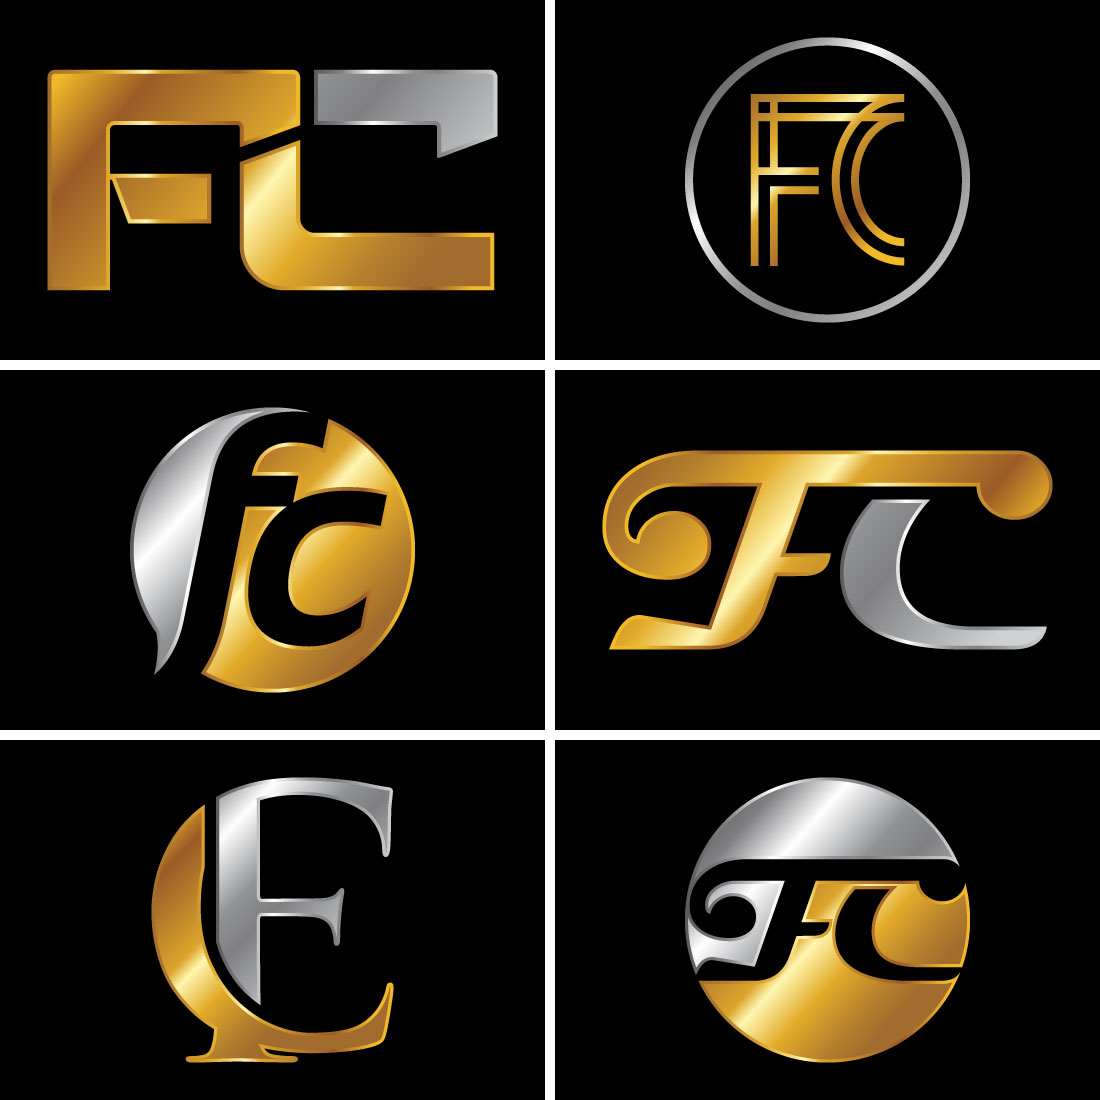 Initial Letter F C Logo Design Vector Template main cover.